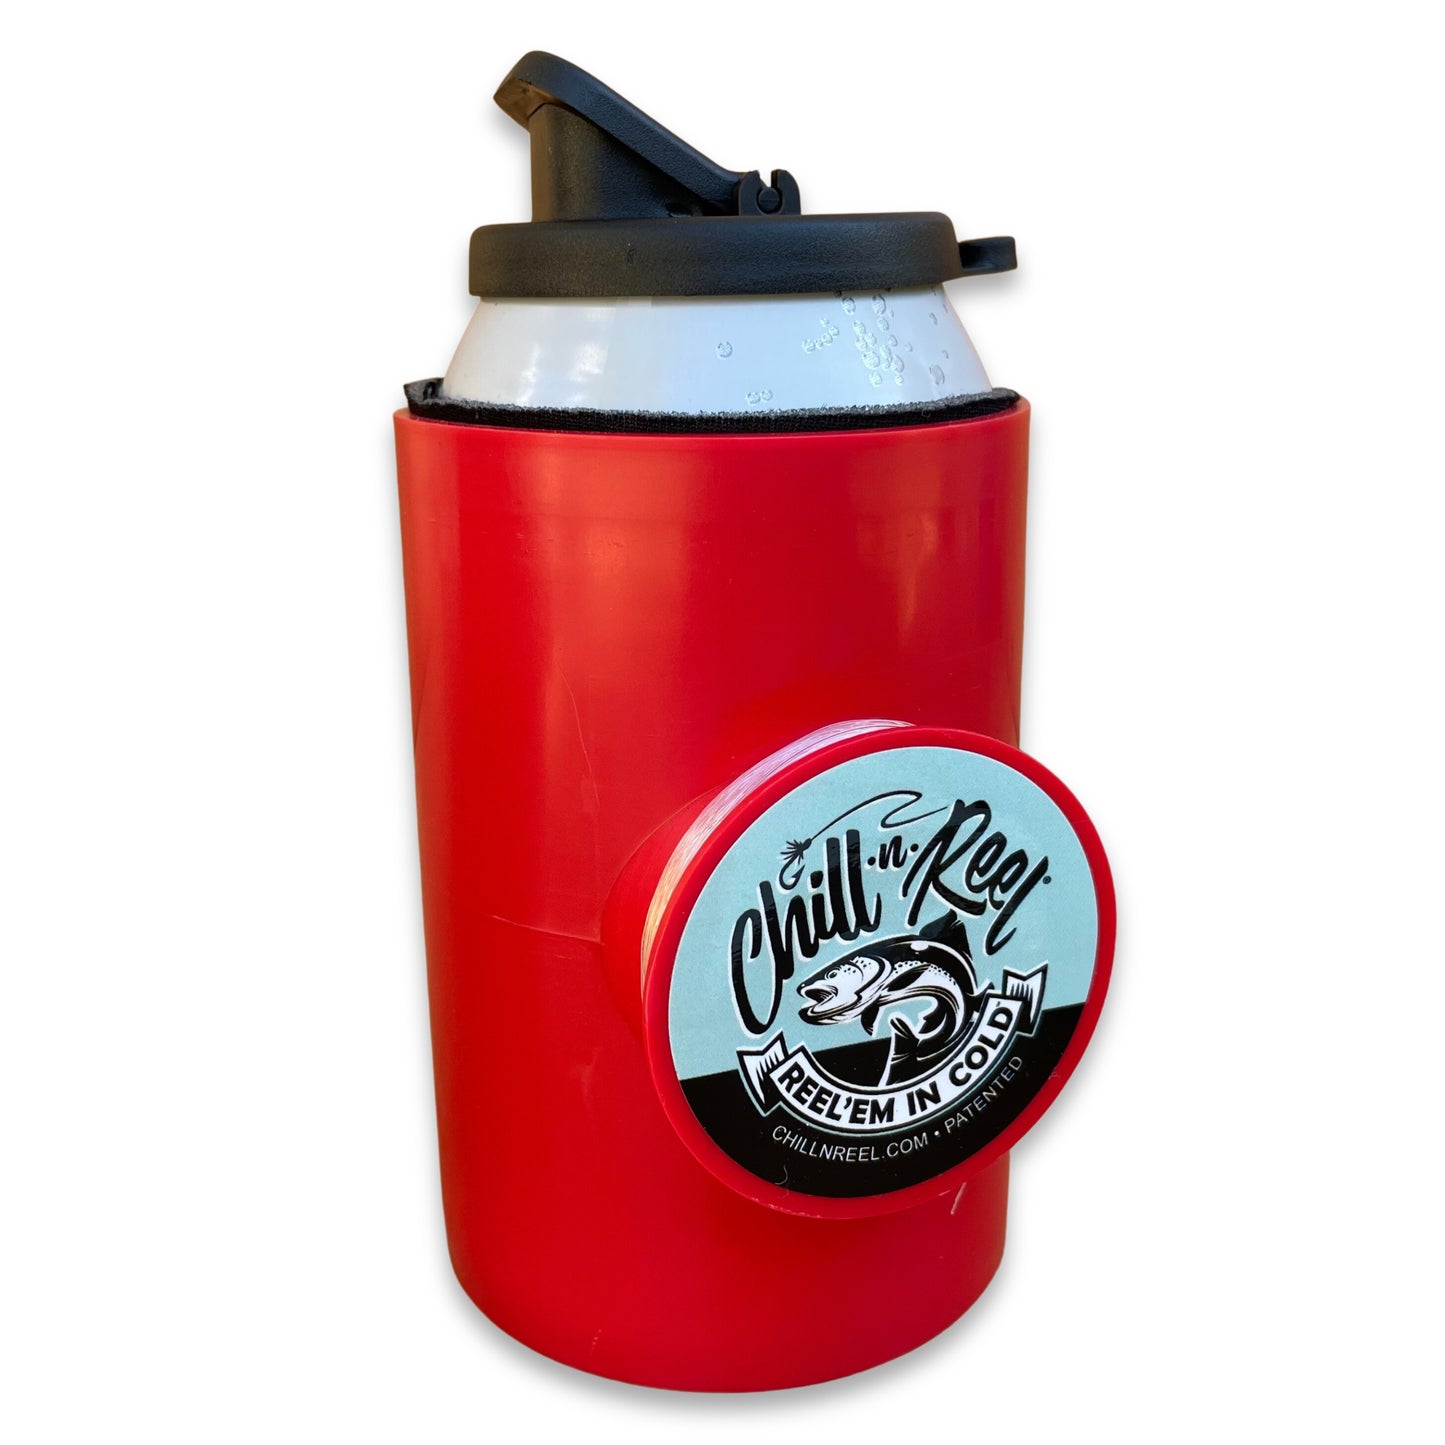 A red insulated drink holder designed to keep beverages cold, this fun fishing gift features a circular logo with a fish and the text “Chill-N-Reel, Reel’em in Cold.” Topped with a black flip-top lid, it’s the perfect Chill-N-Reel Original Chill-N-Reel for any outdoor enthusiast.